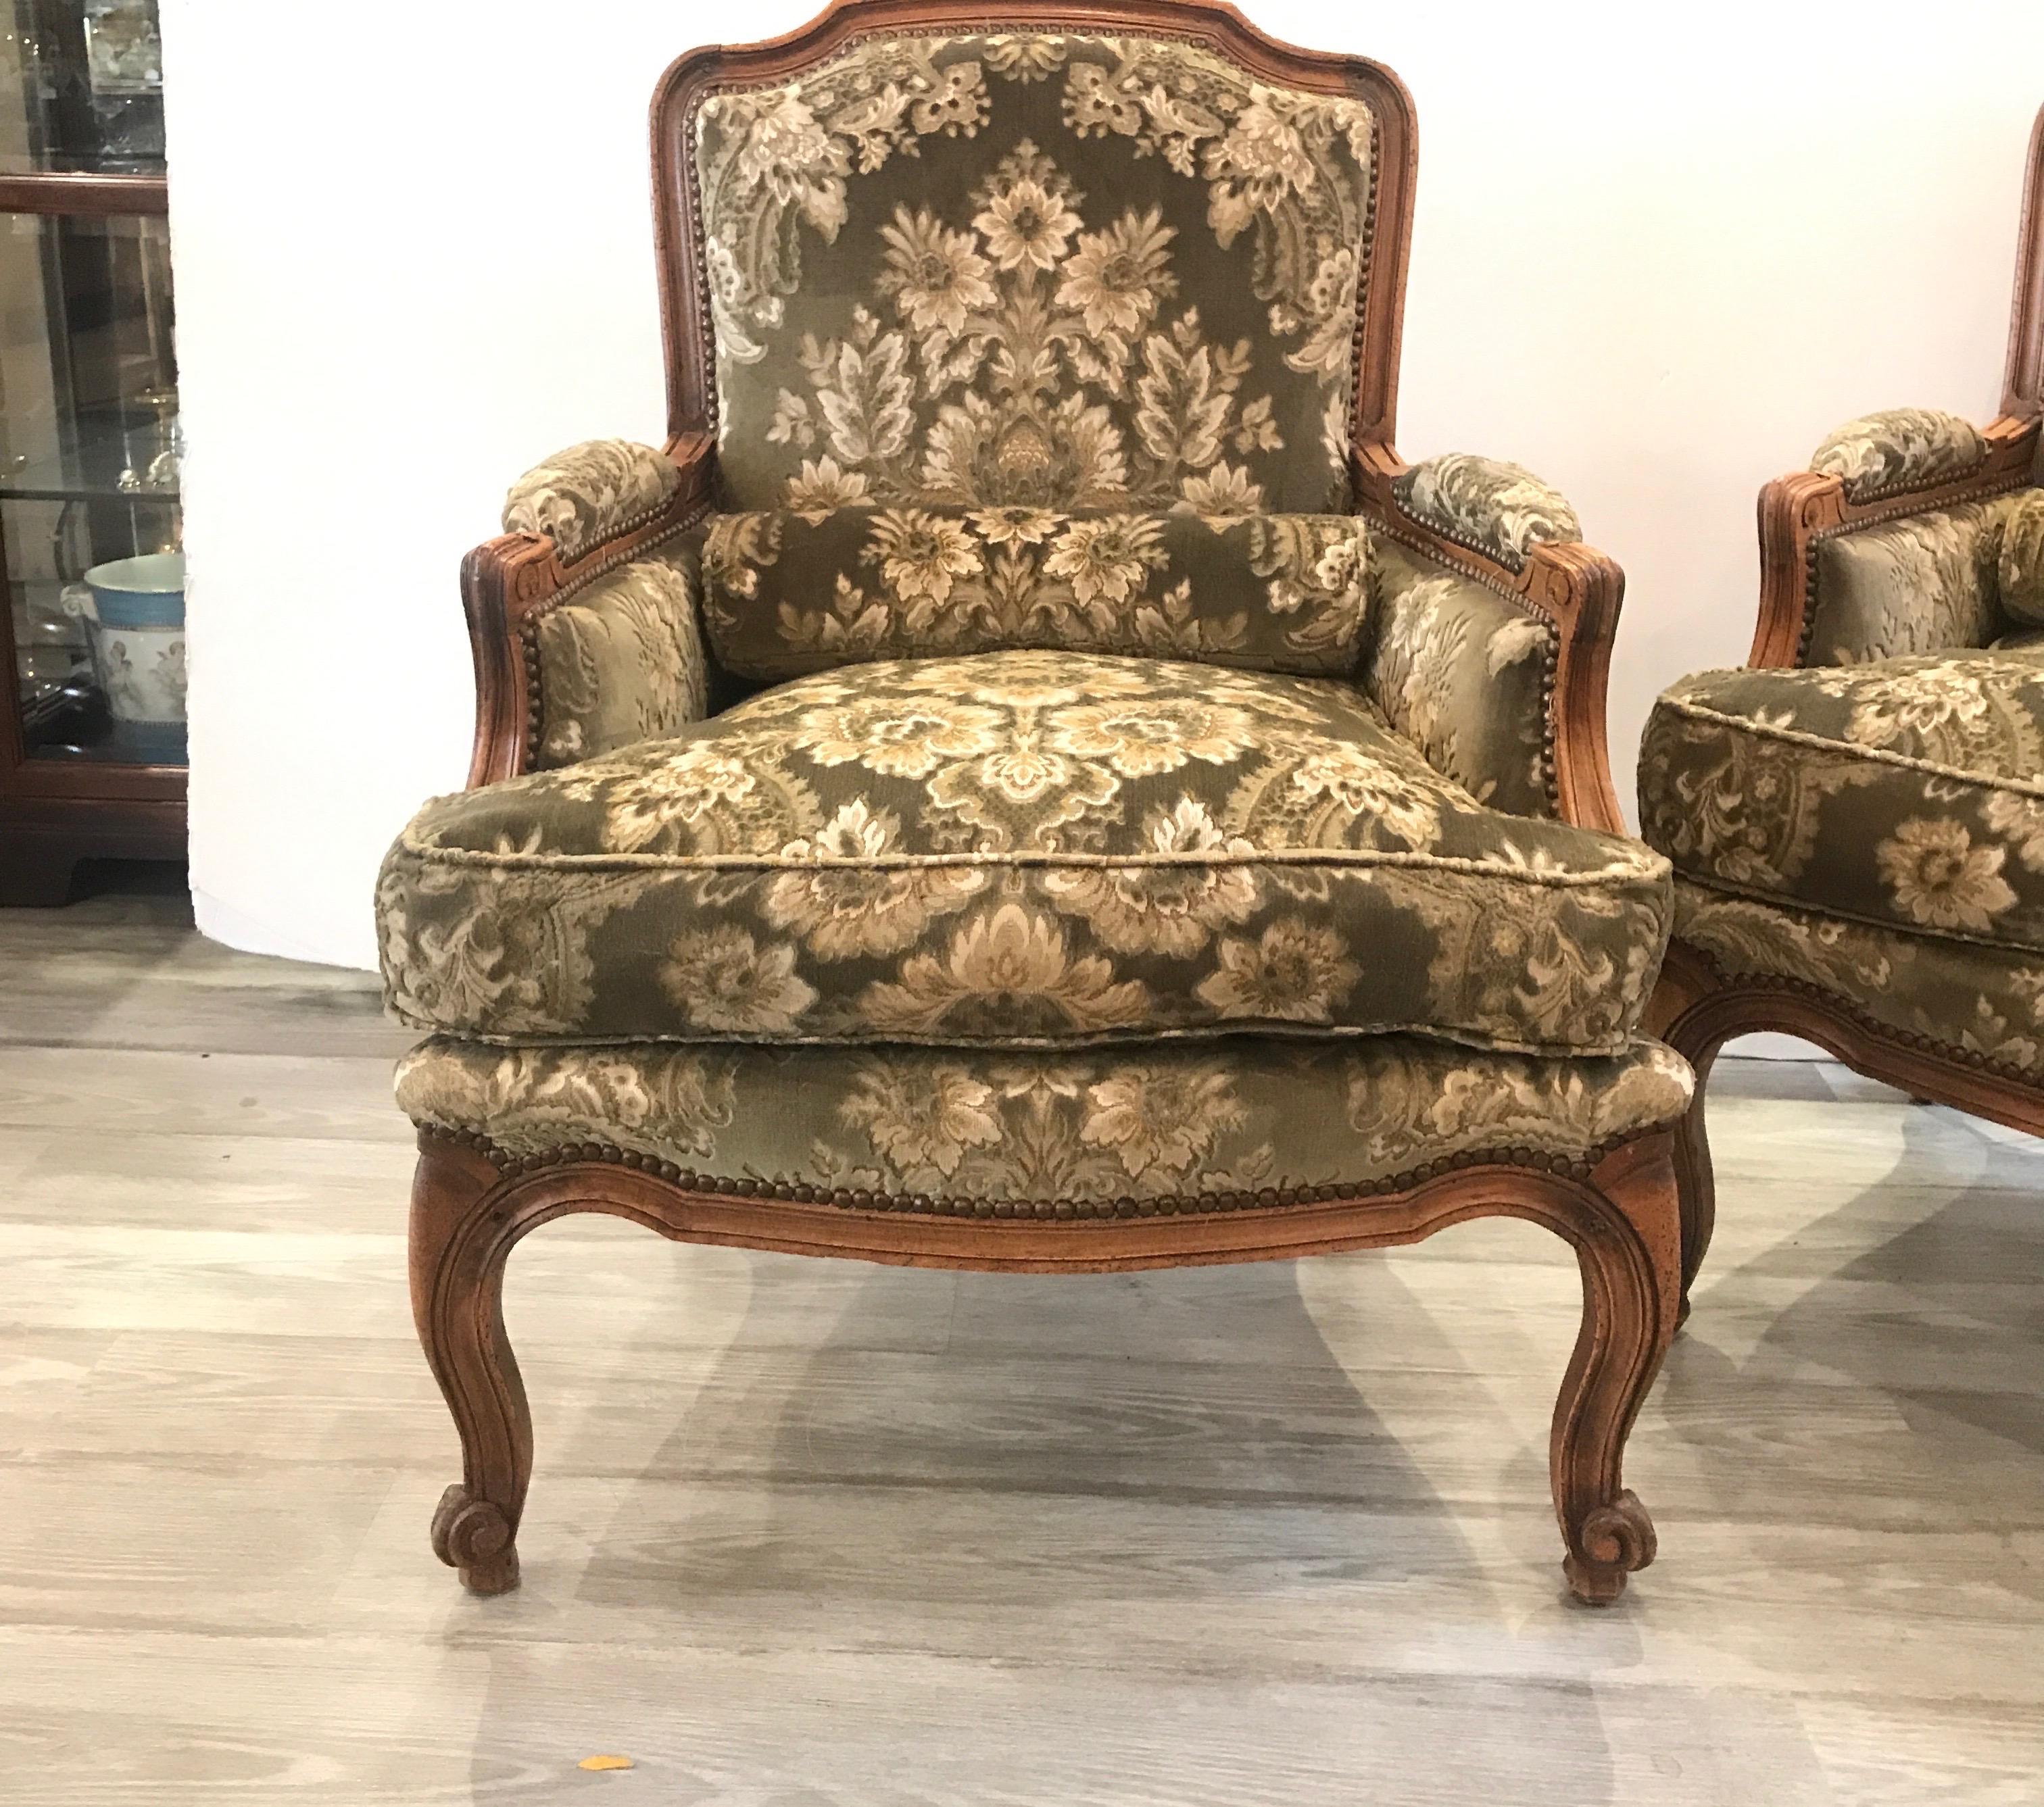 Beautiful pair of bergère chairs with hand carved details. The medium wood color fruitwood frames with new high end Italian damask pattern cut velvet upholstery. The attached back with loose cushion seat with small round lumbar pillow. The cushion